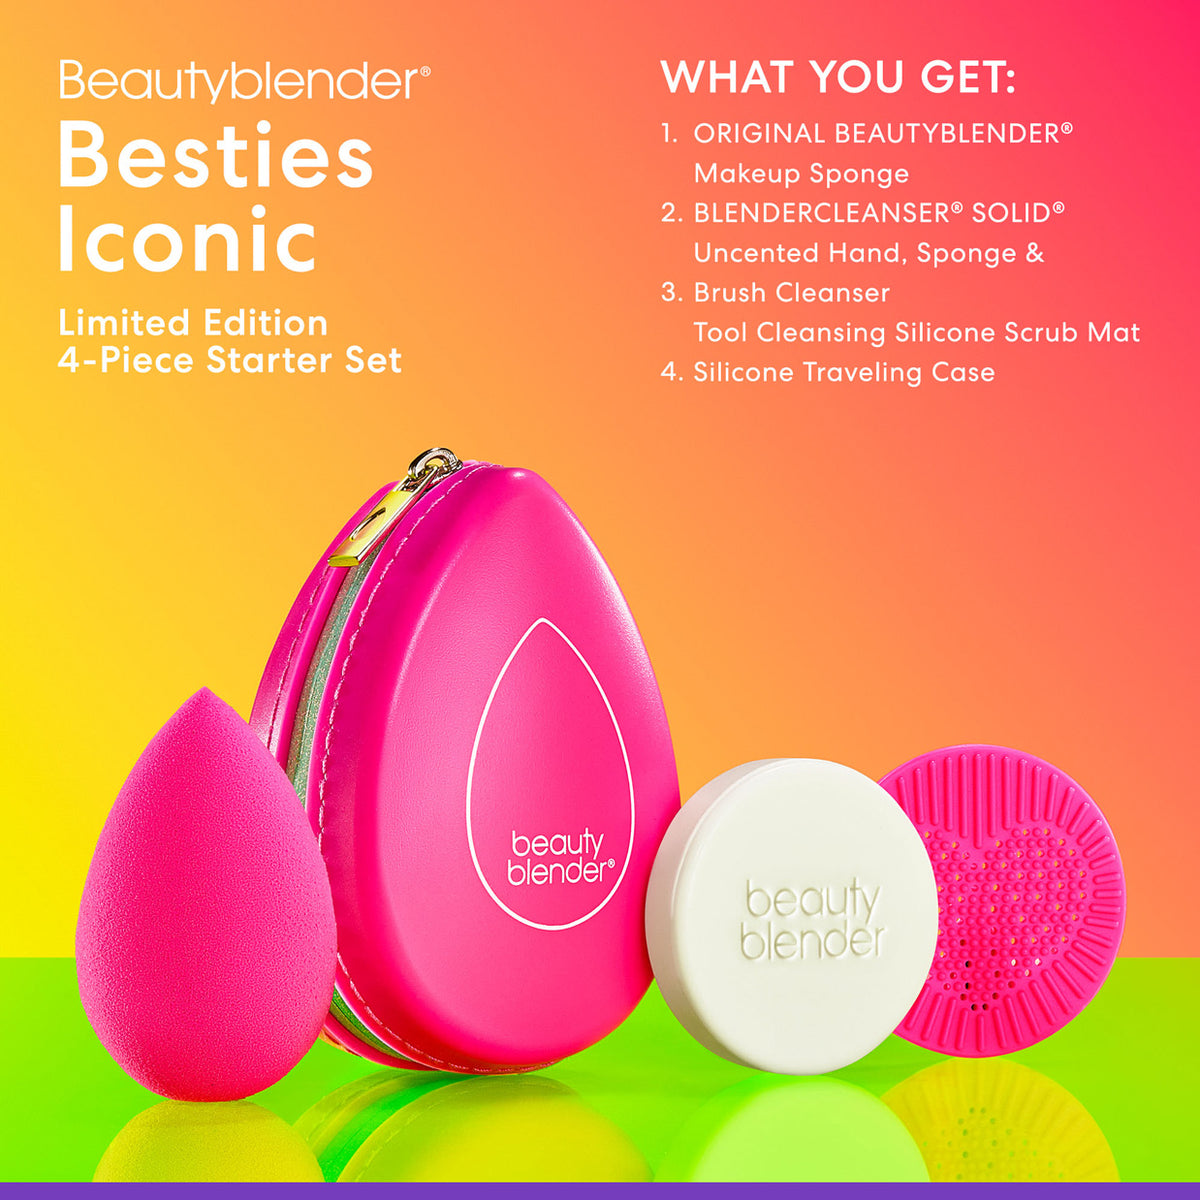 Besties Iconic Limited Edition 4-Piece Starter Set.